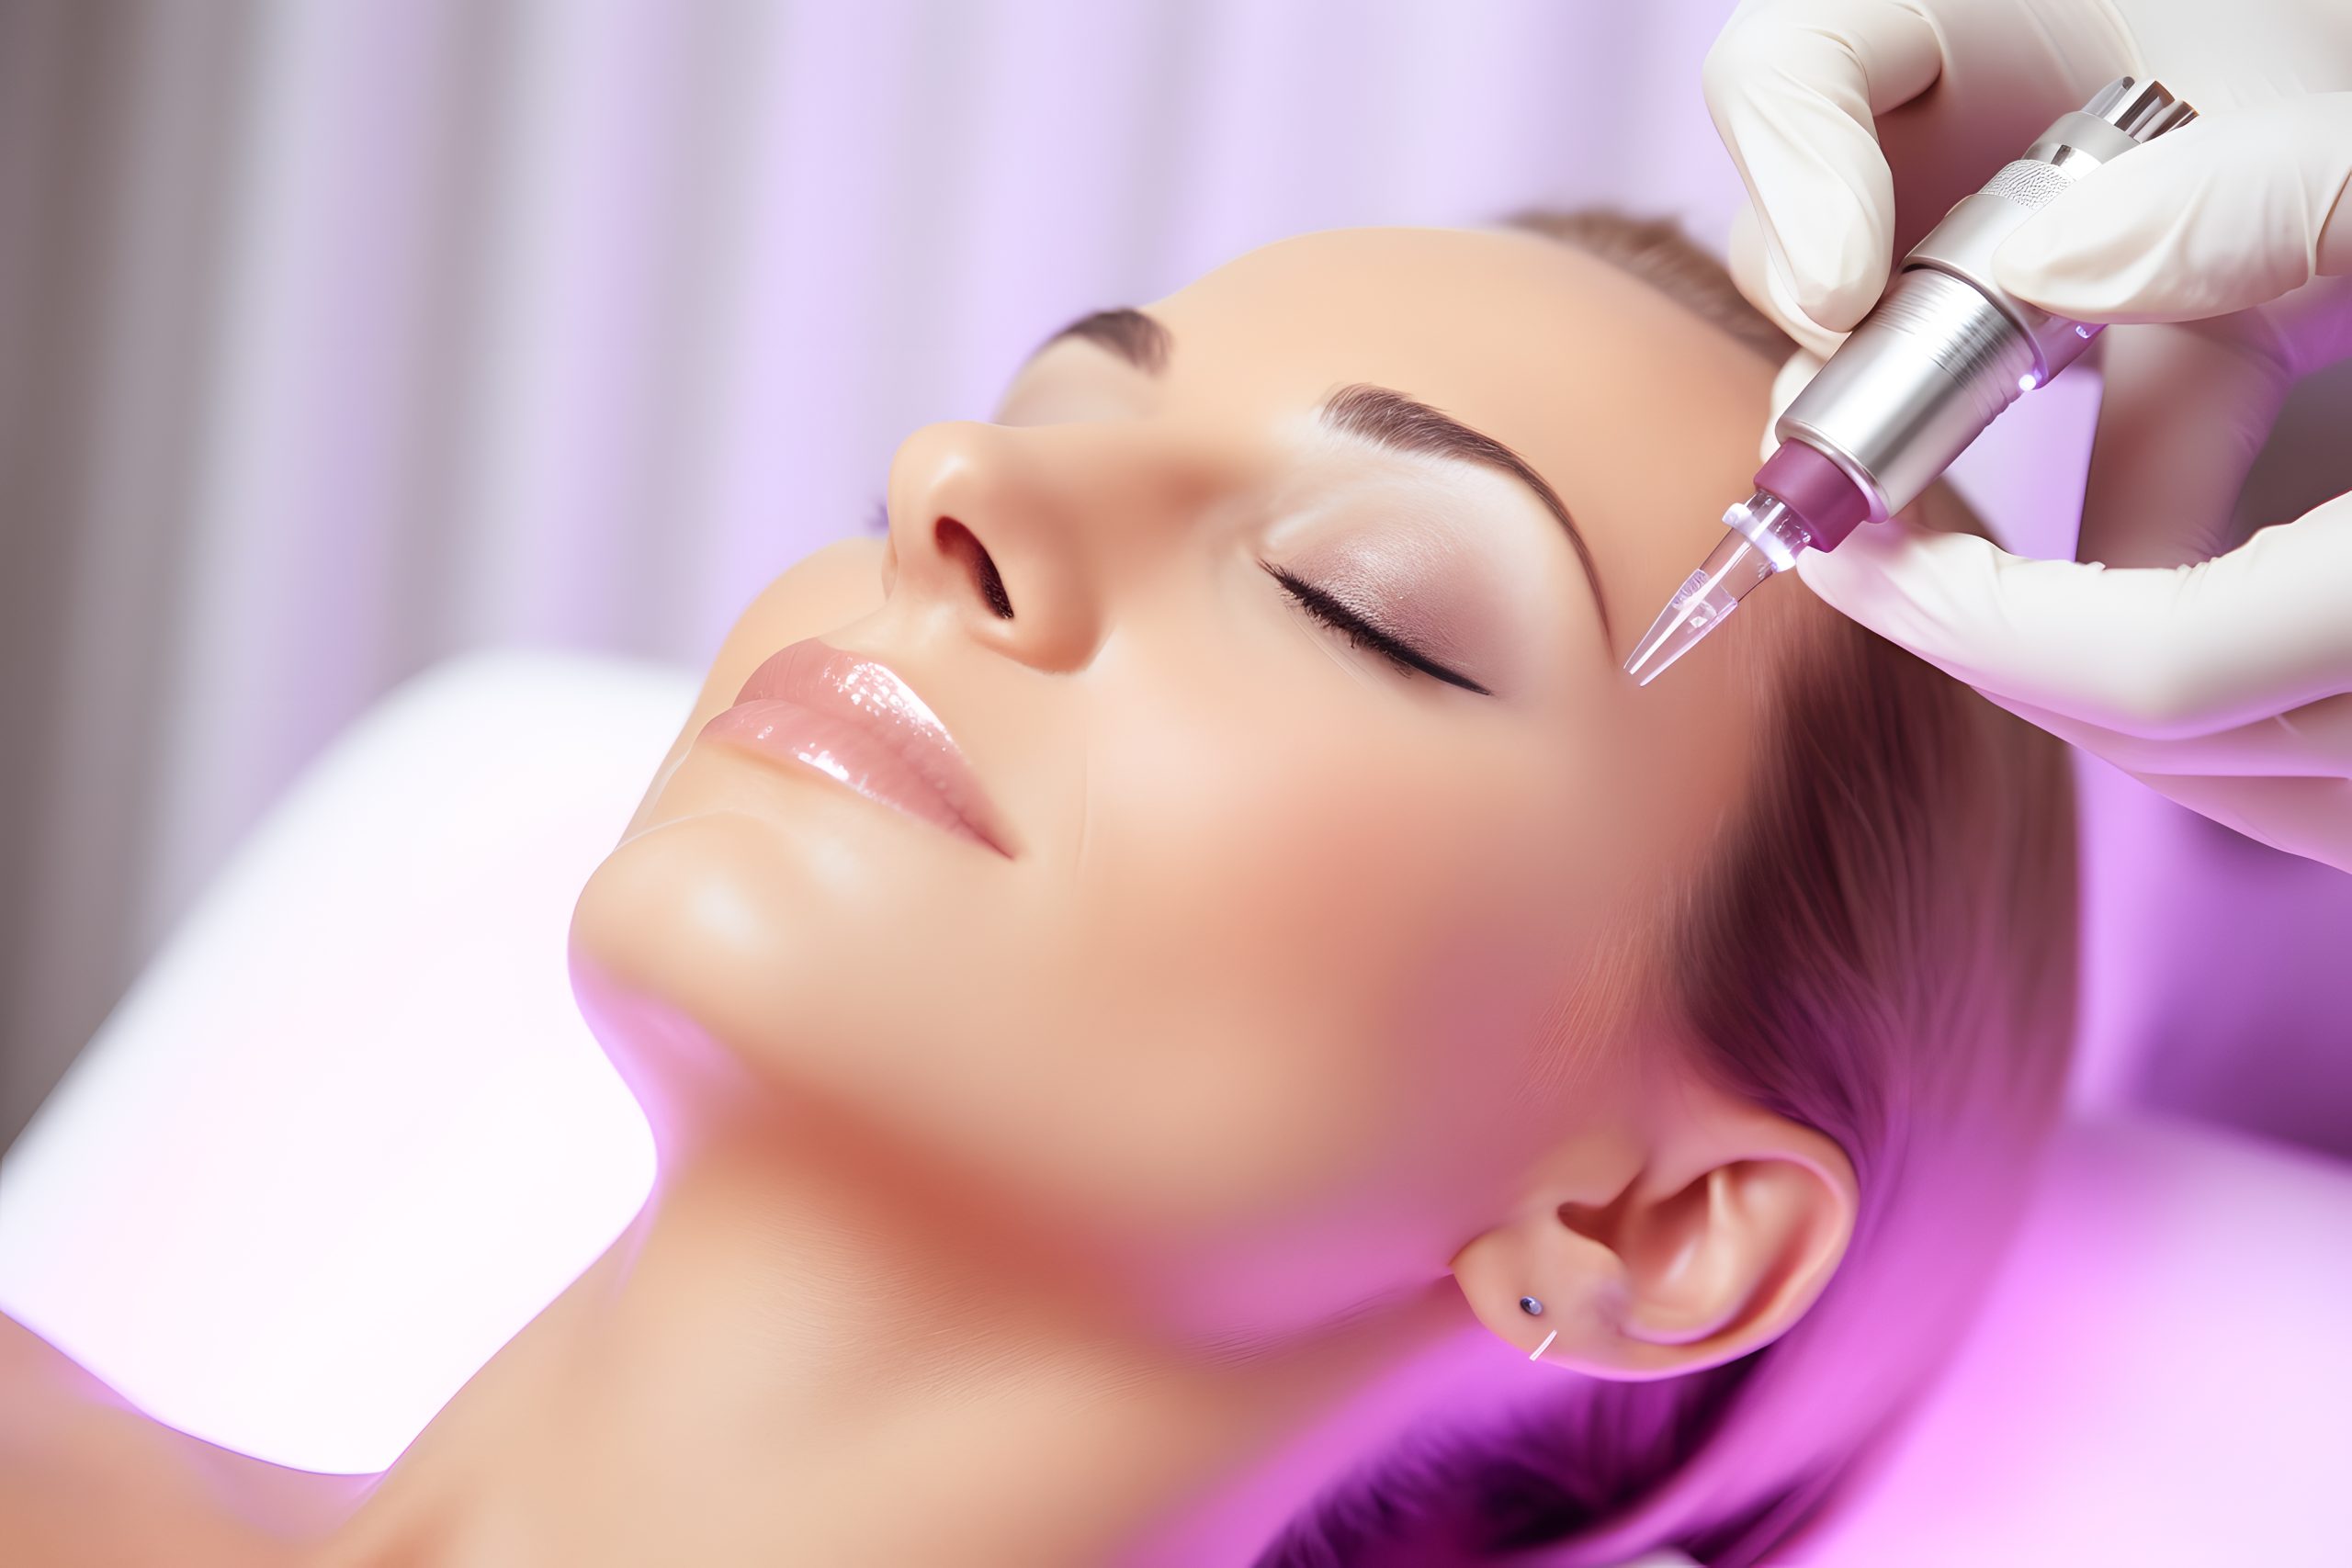 medical spa services - woman receiving facial injectable - medical spa in bergen county service concept